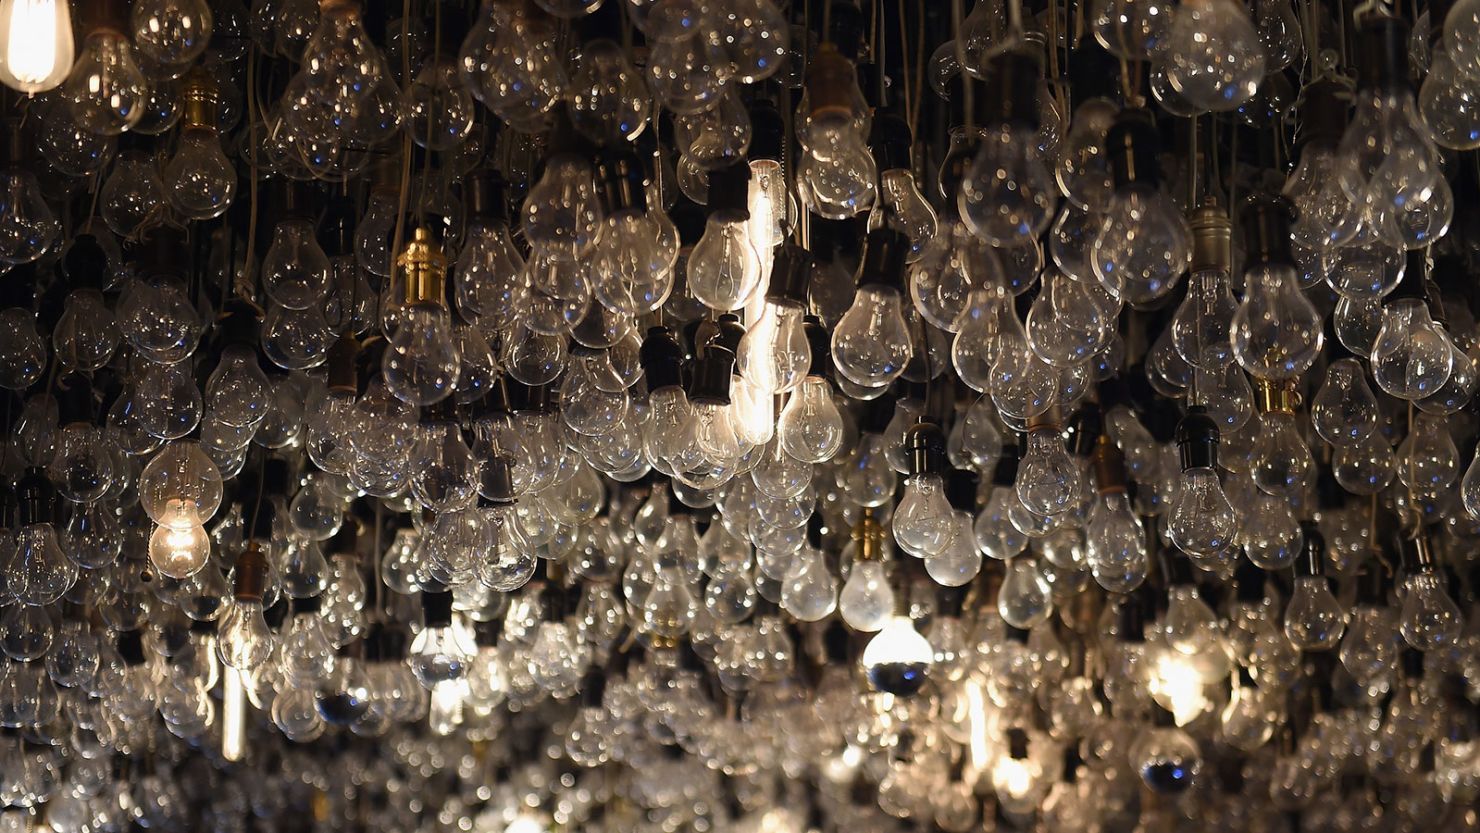 Caption:NEW YORK, NY - FEBRUARY 09: (EXCLUSIVE ACCESS, SPECIAL RATES APPLY) Lightbulbs hang from the ceiling inside the Drawing Room during The Daily Front Row's celebration of the 10th Anniversary of CBS Watch! Magazine at the Gramercy Terrace at The Gramercy Park Hotel on February 9, 2016 in New York City. (Photo by Nicholas Hunt/Getty Images)
